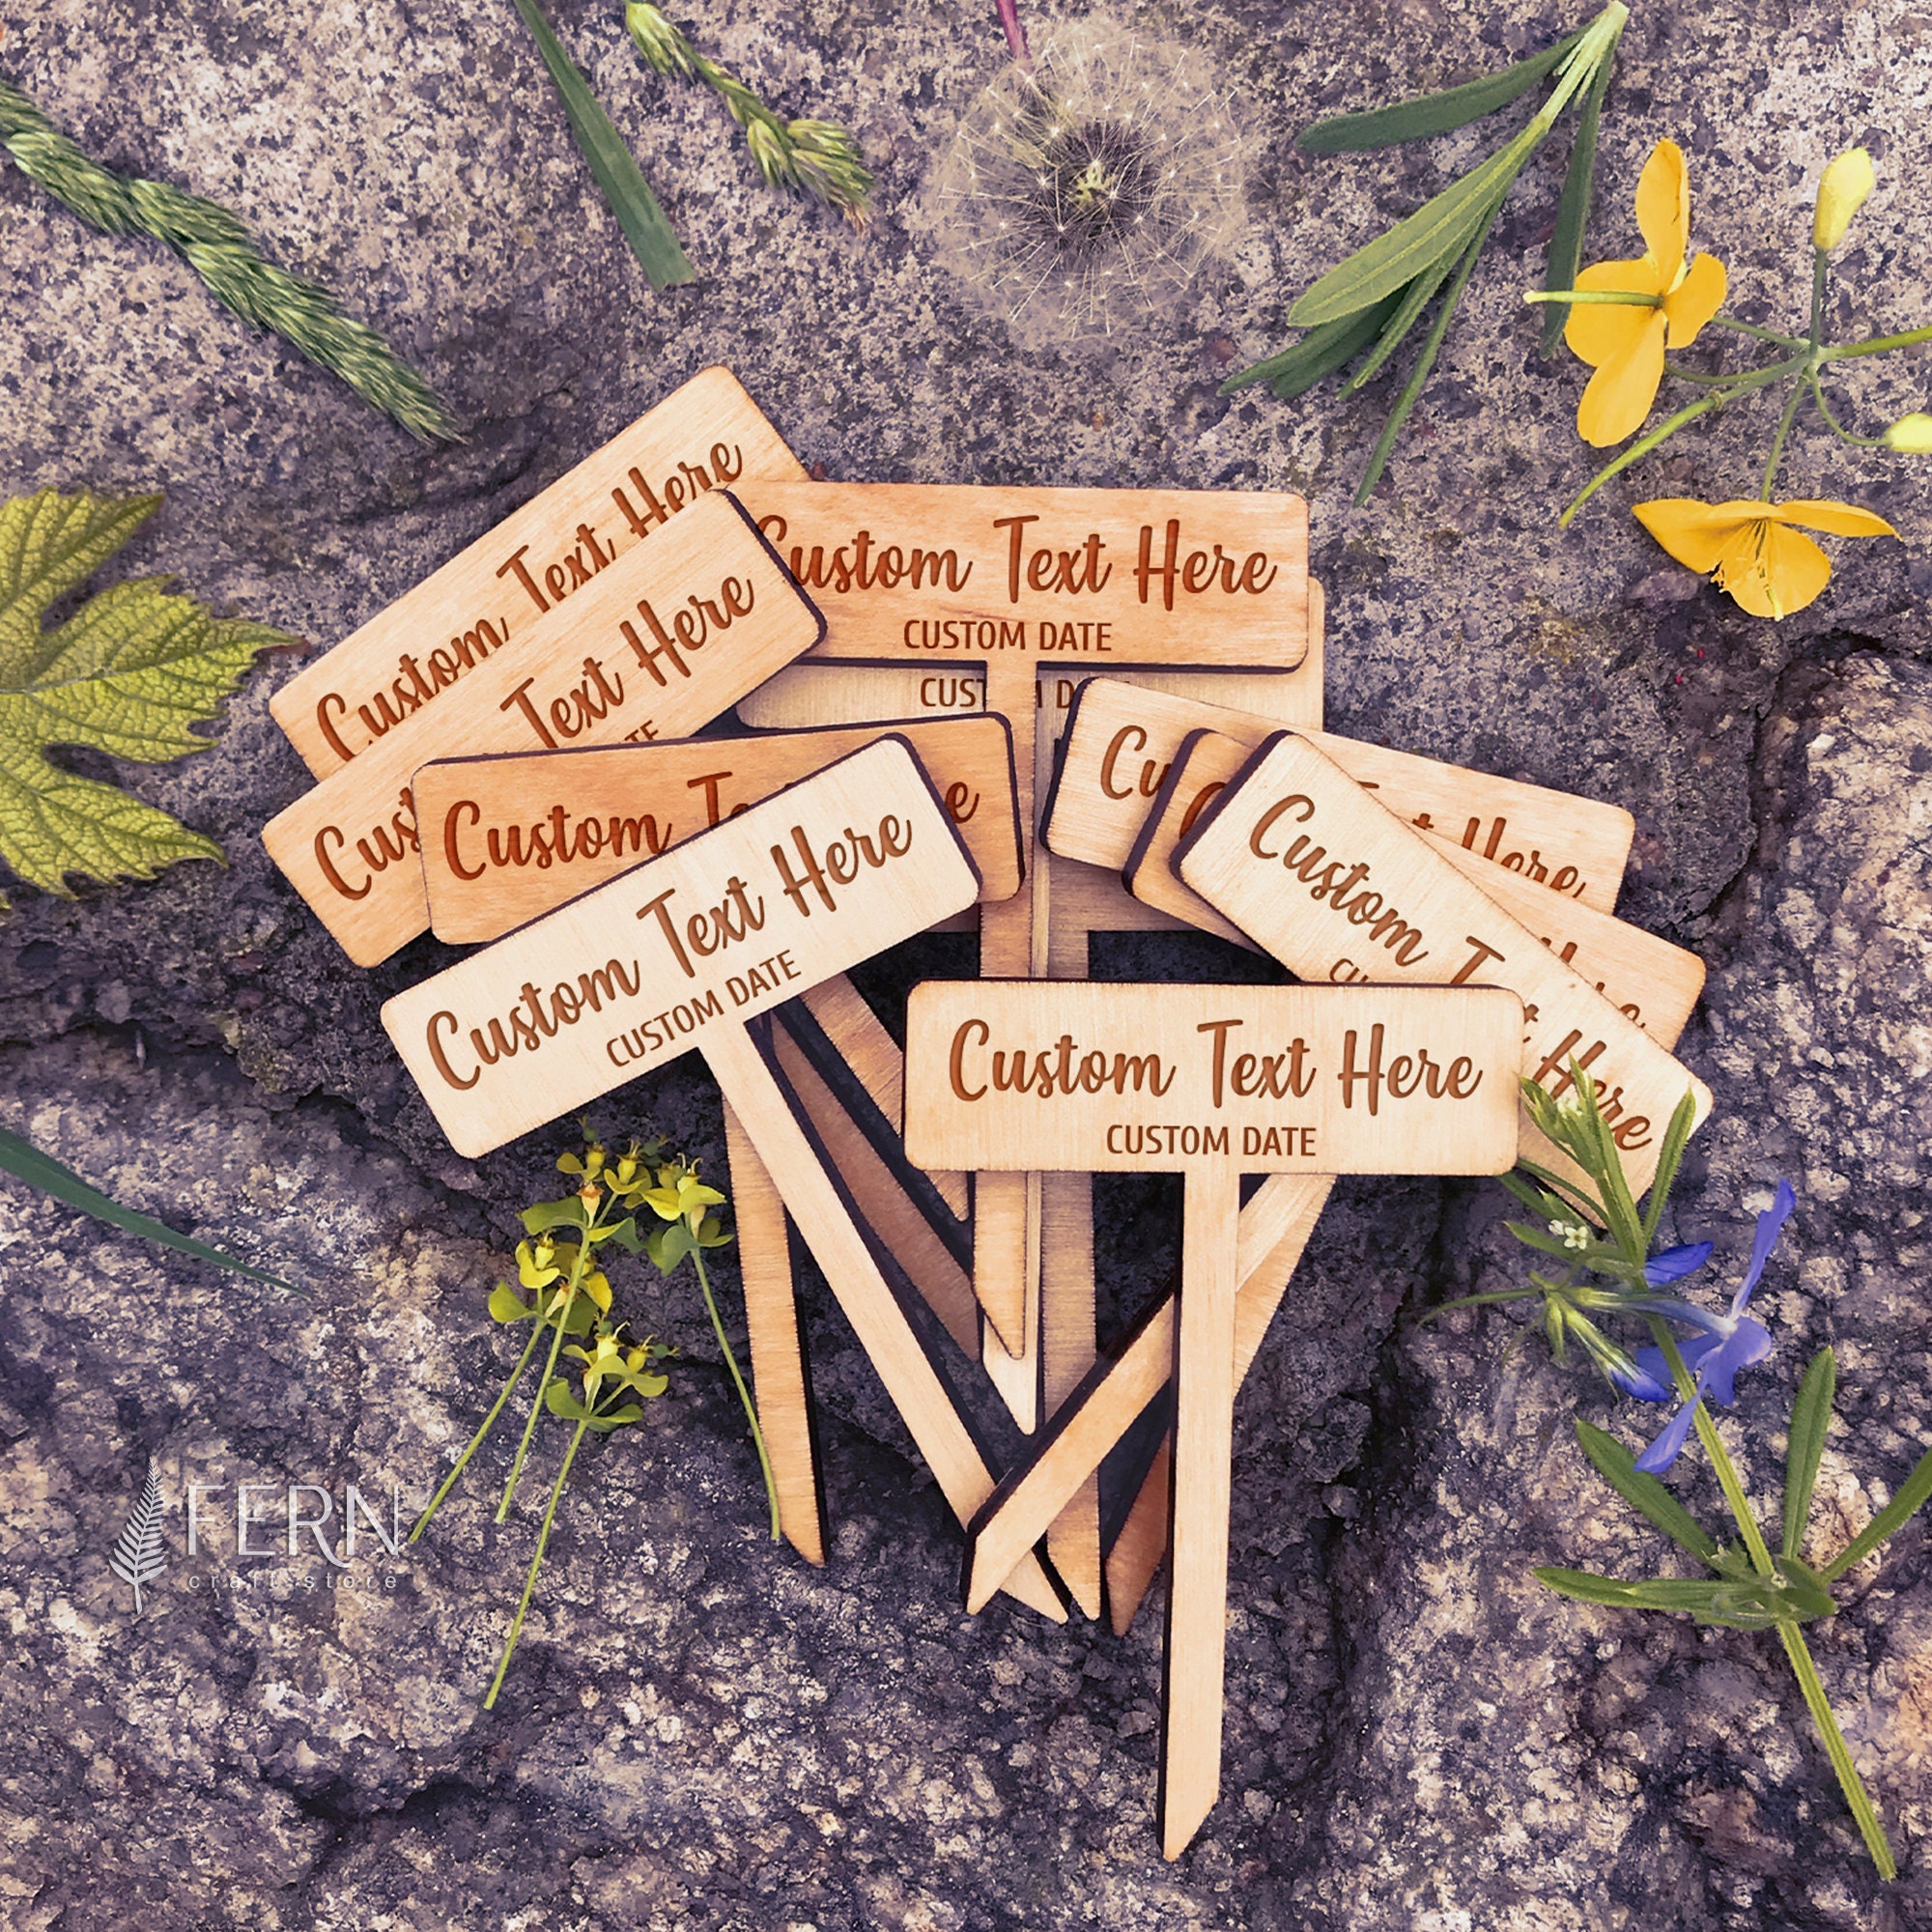 OwnGrown Wooden Arrow Plant Markers - 50 Plant Name Tags with Marker Pen  for Gardening and Seedling Labels - Garden Sign and Labels for Plants 